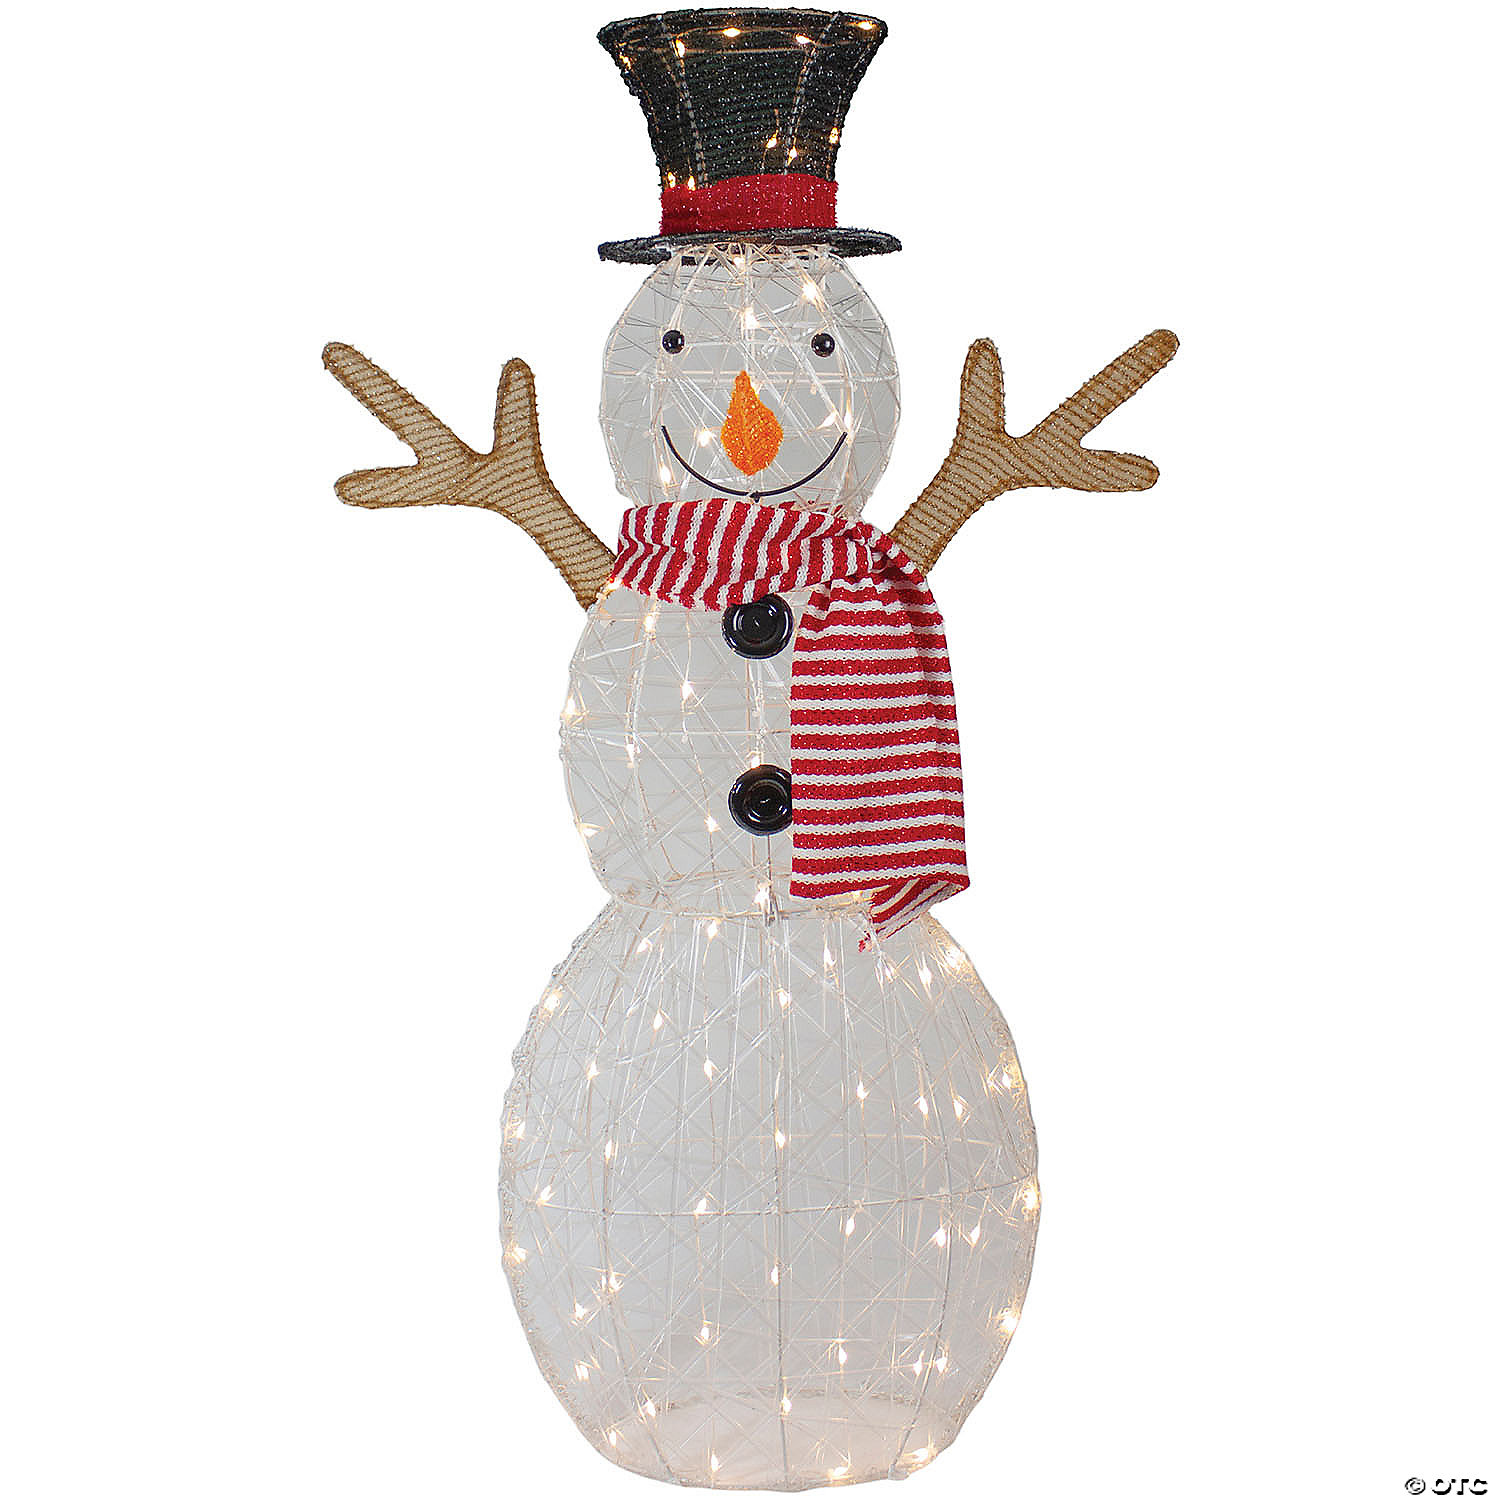 Flannel Snowman Christmas Yard Decoration for Home Indoor Outdoor Garden Lawn 23 Inch Pre-Lit 25 Lights Snowman with Top Hat and Red Scarf Prsildan Christmas Lighted Decorations 